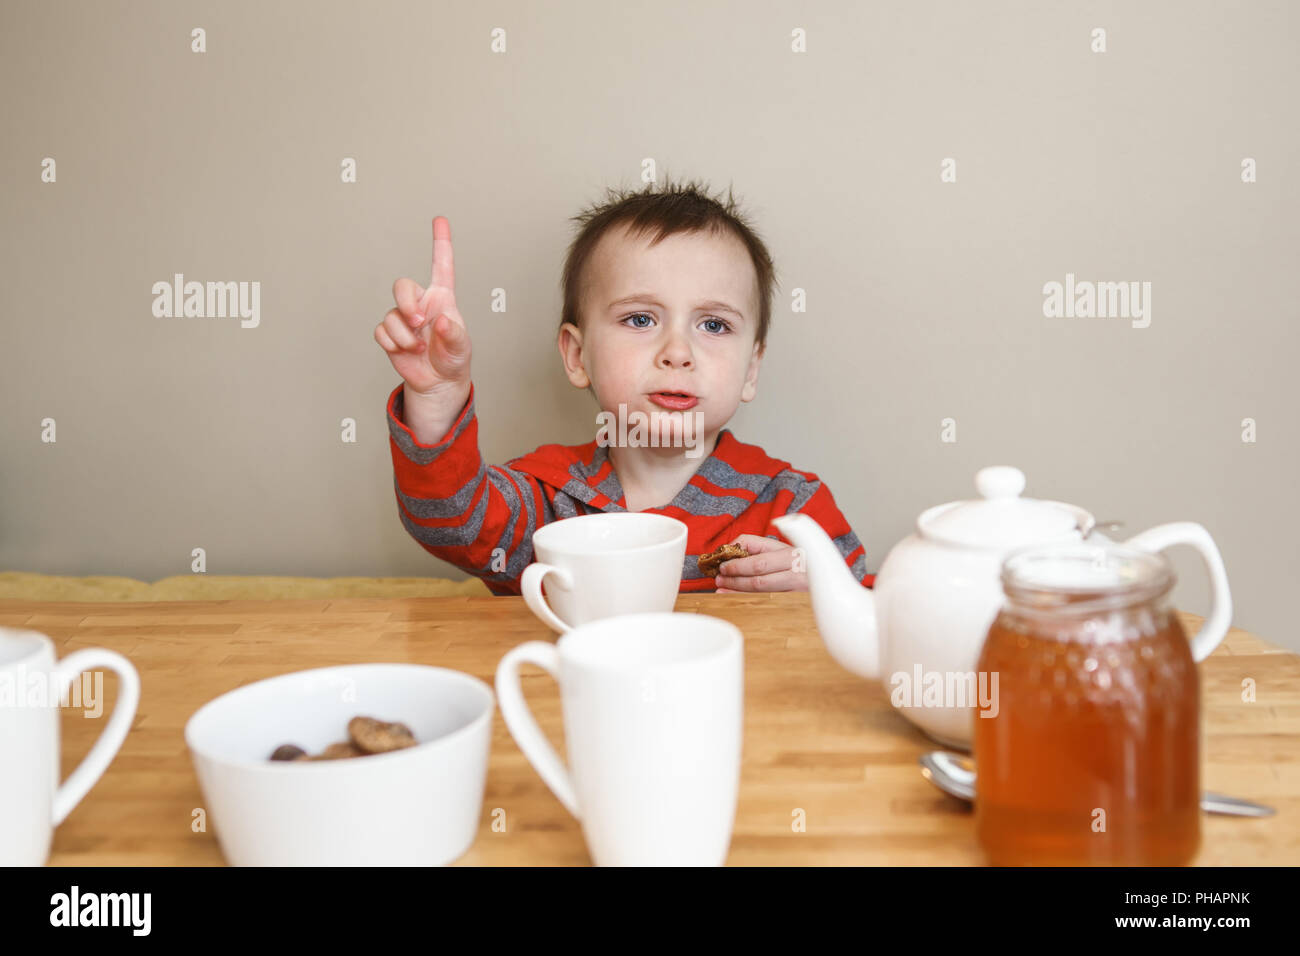 Close-up candid natural portrait of cute little boy toddler in kitchen drinking tea juice, making funny face, showing finger, lifestyle documentary st Stock Photo